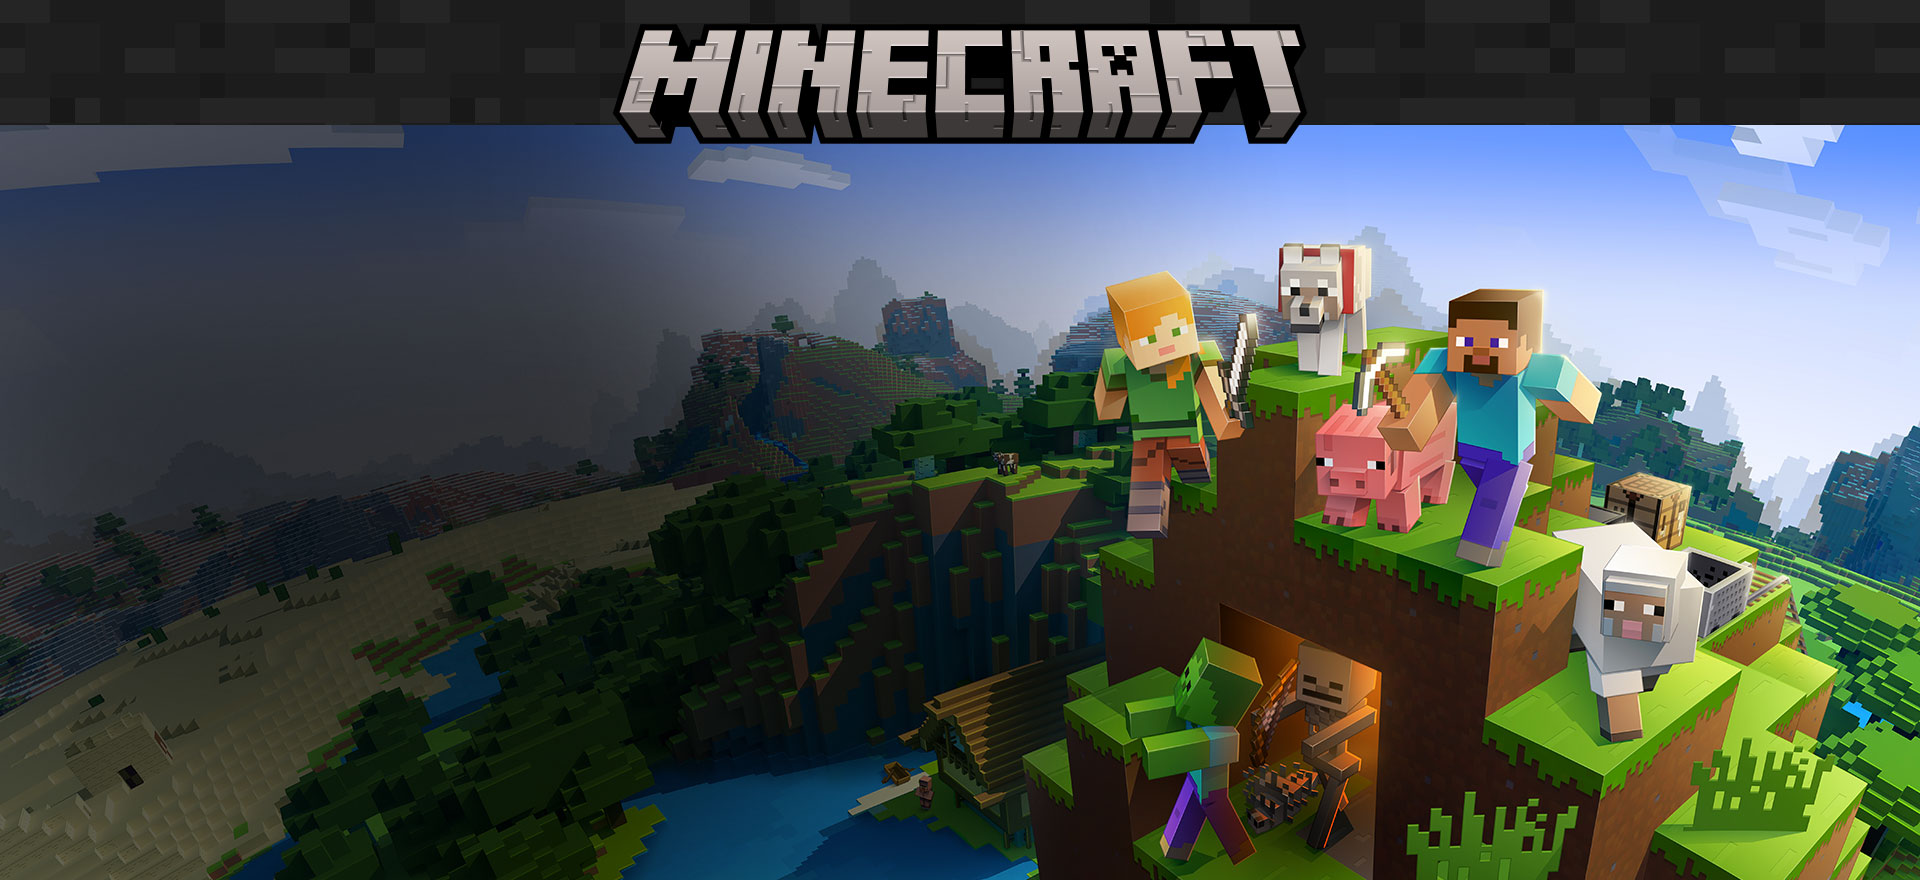 Minecraft logo with in game characters on block environment background